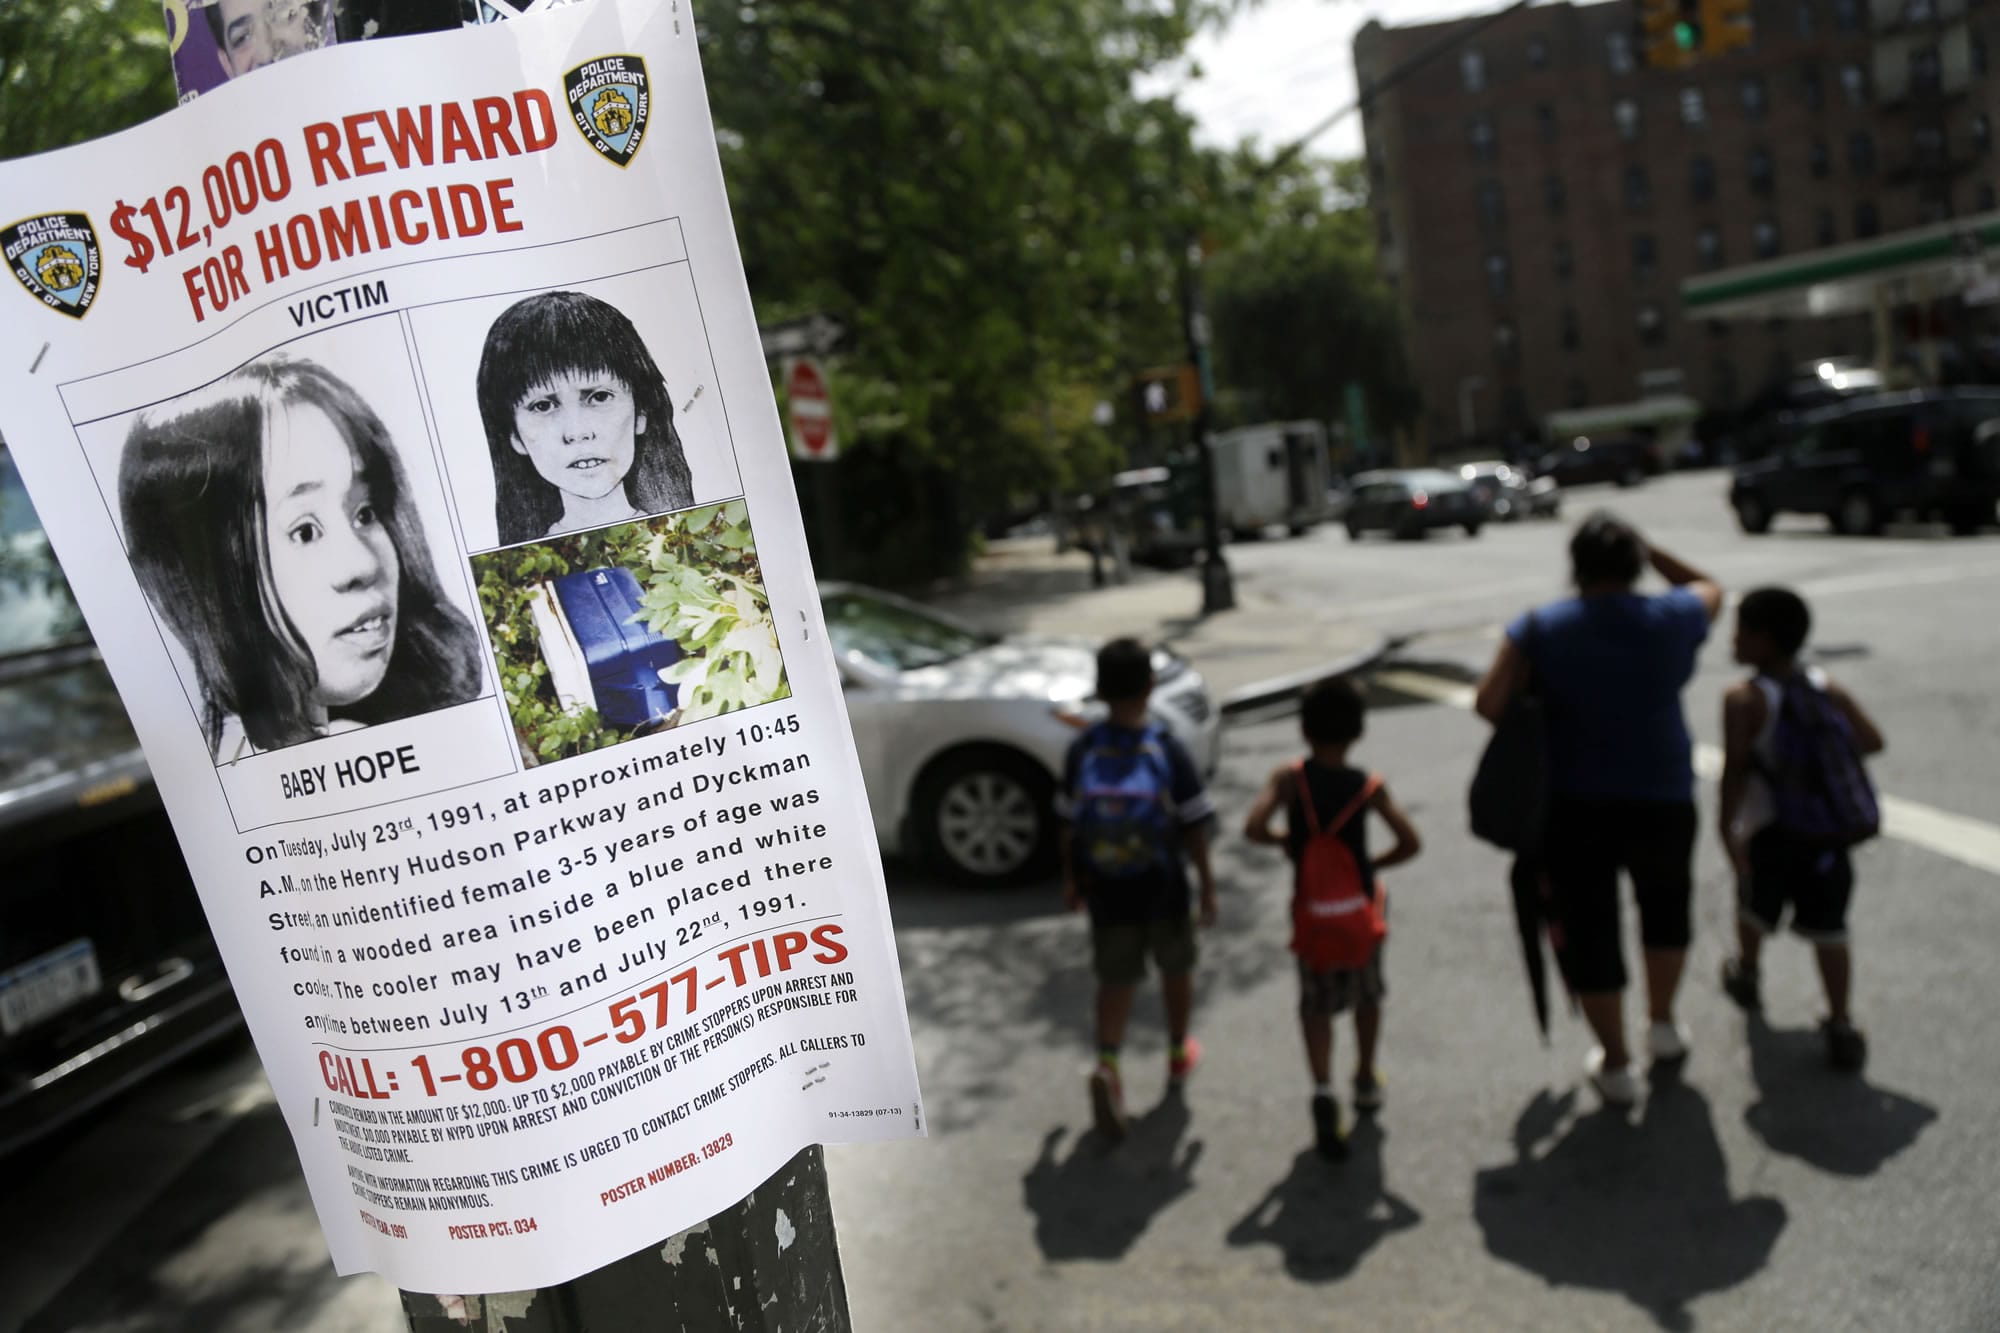 A poster soliciting information regarding an unidentified body hangs July 23 near the site where the body was found in New York.